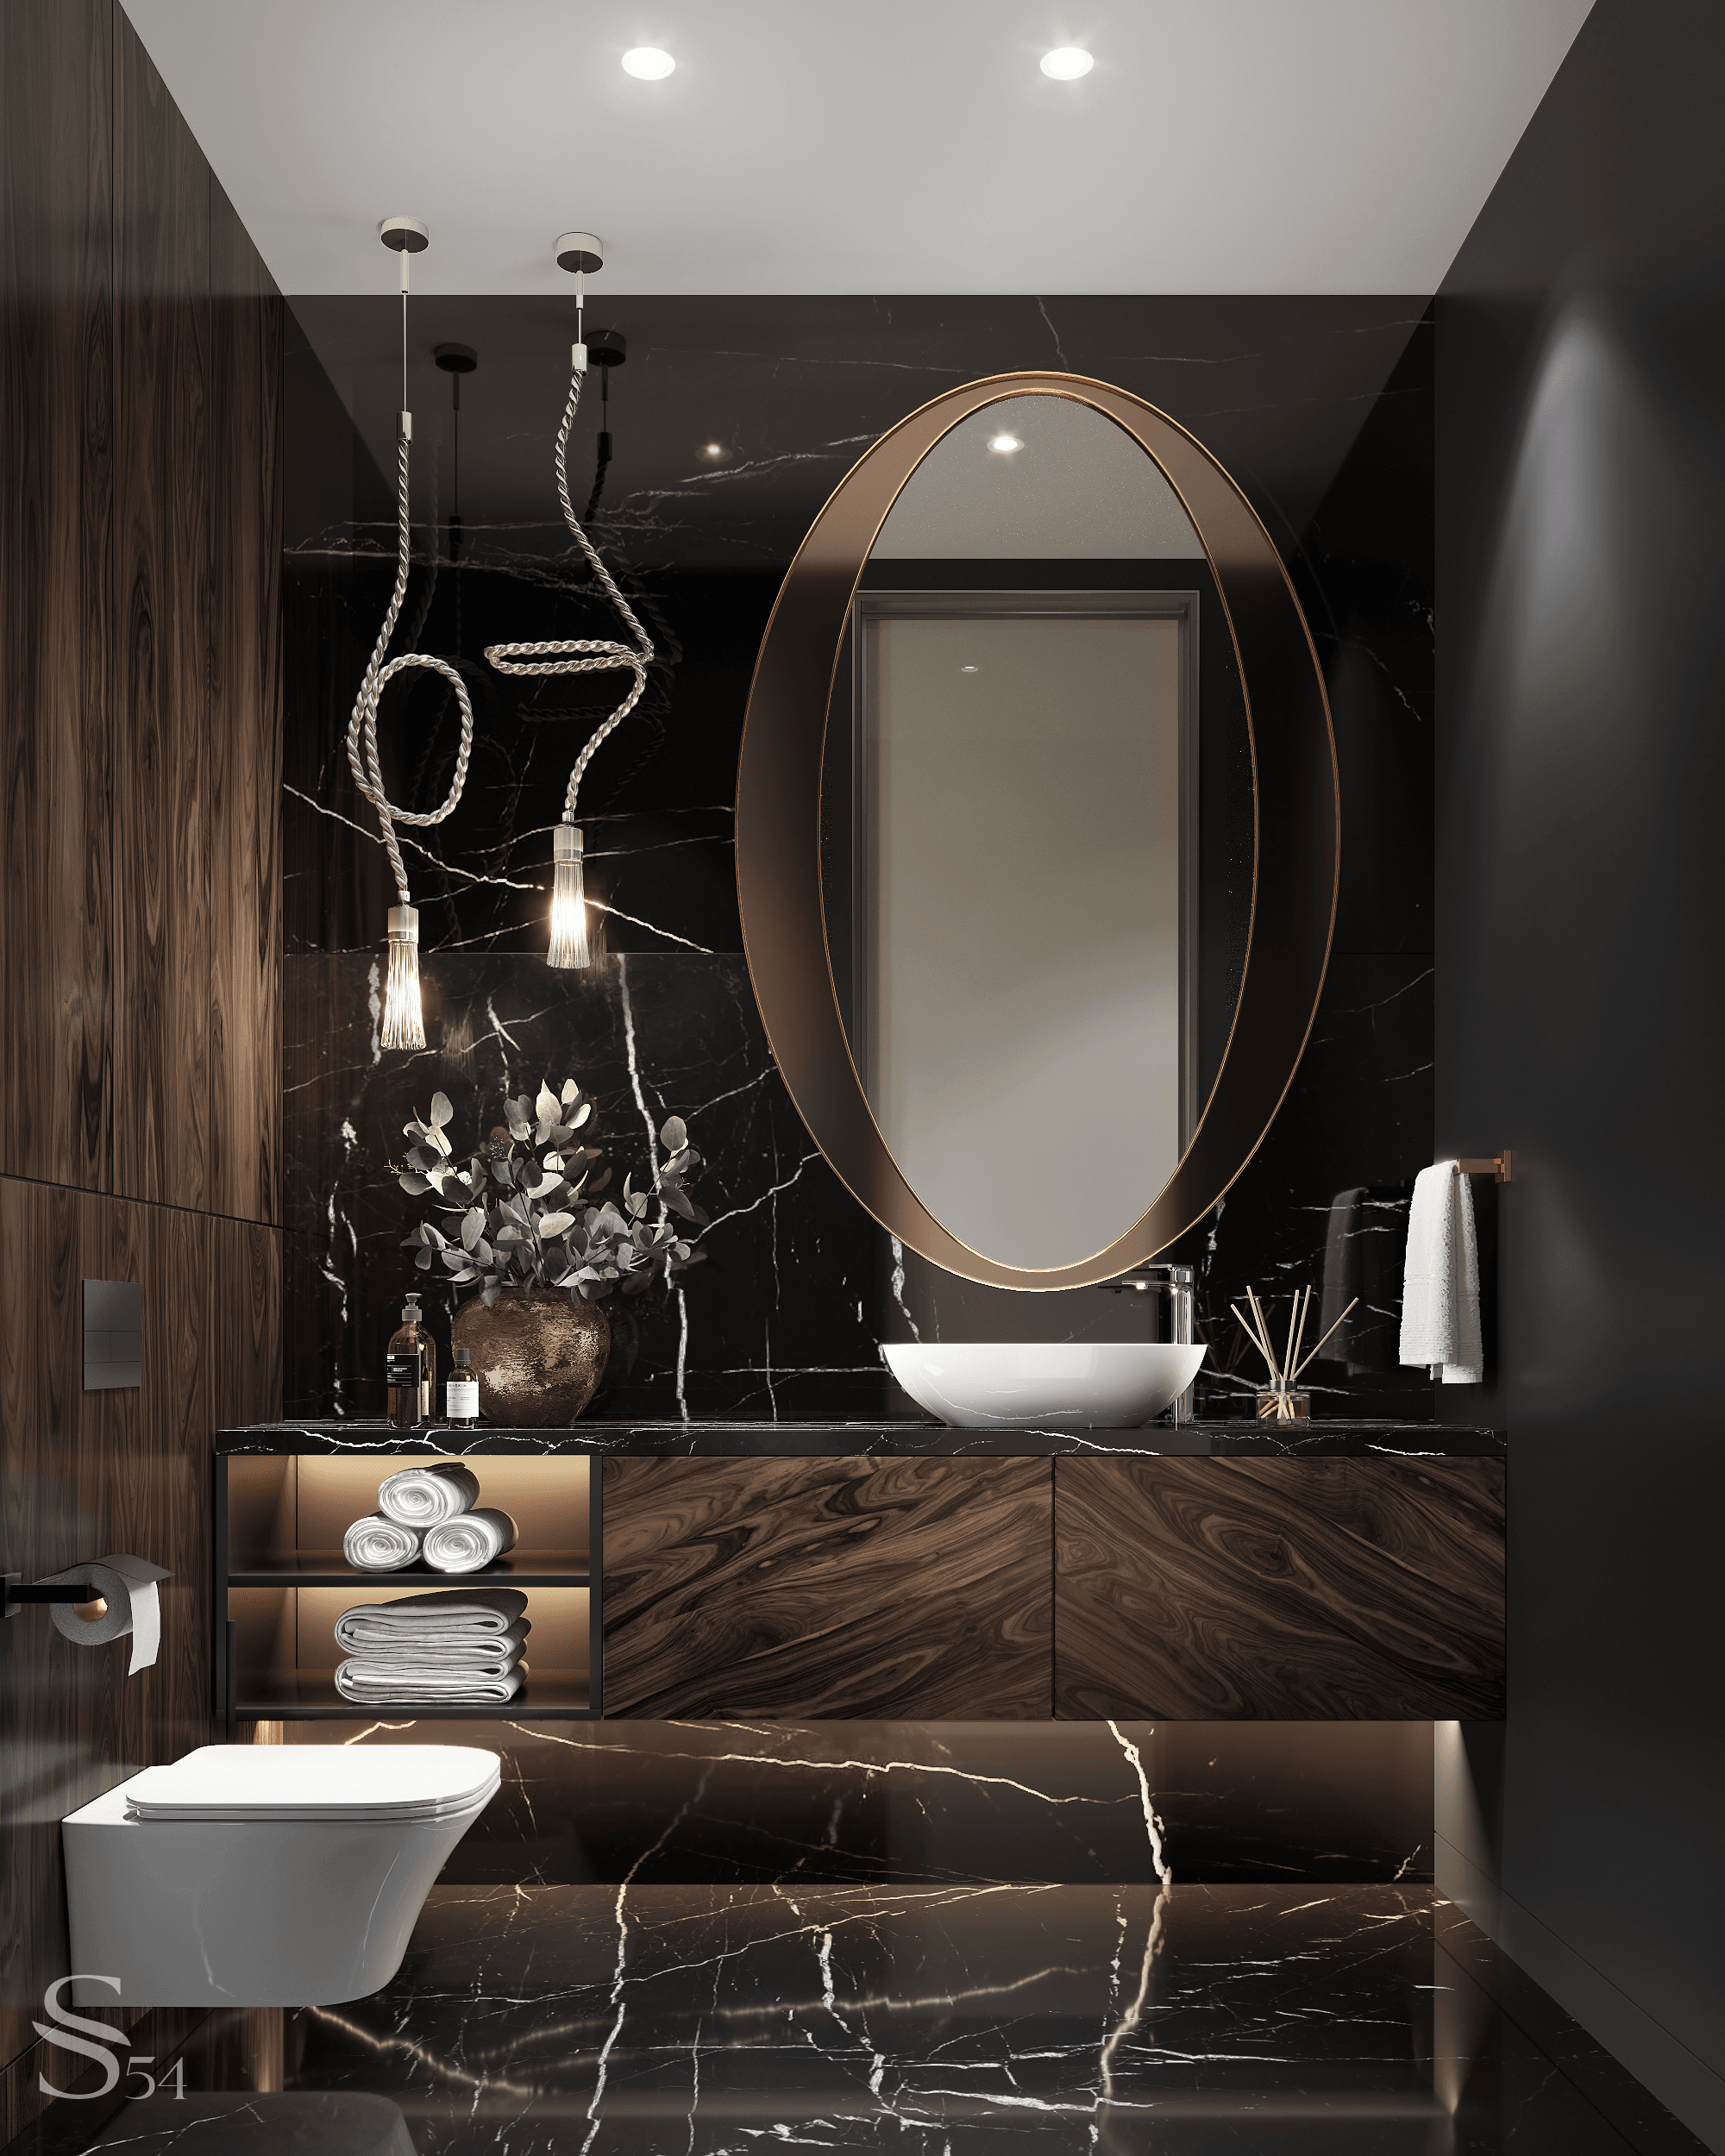 Second guest bathroom. Both are done in a dramatic dark color scheme